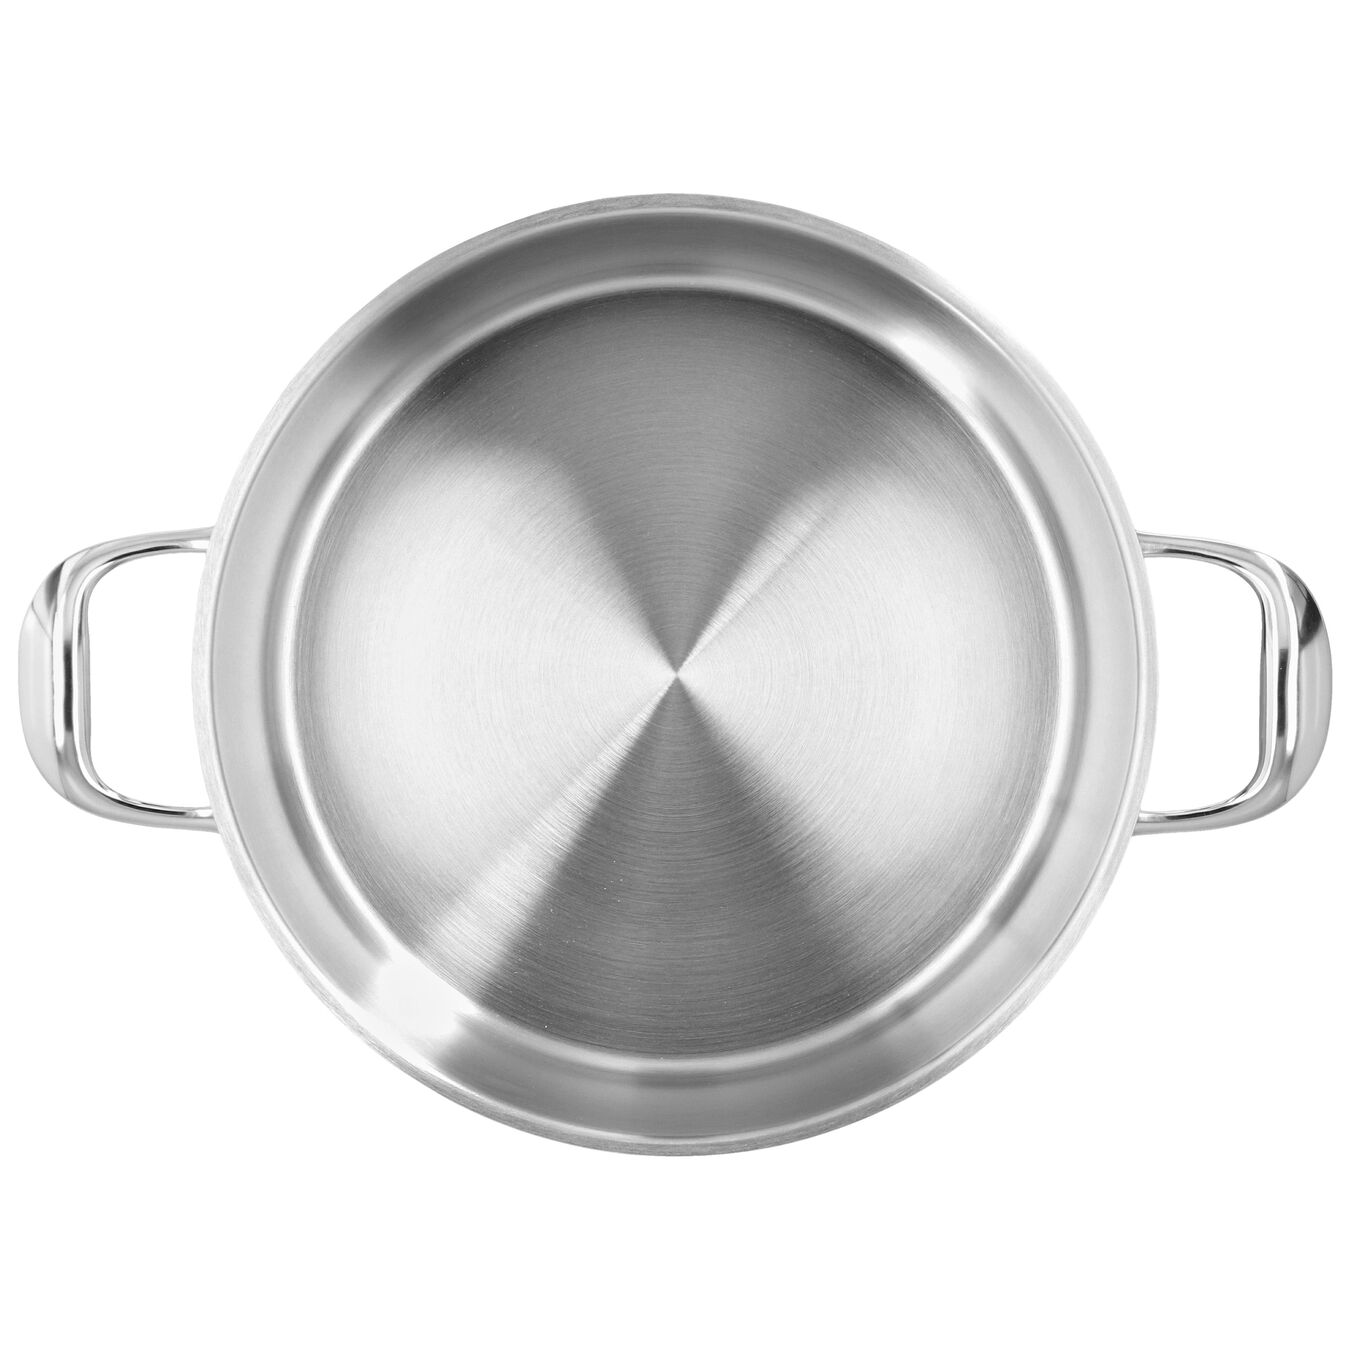 5.2 l 18/10 Stainless Steel Stew pot with lid,,large 5